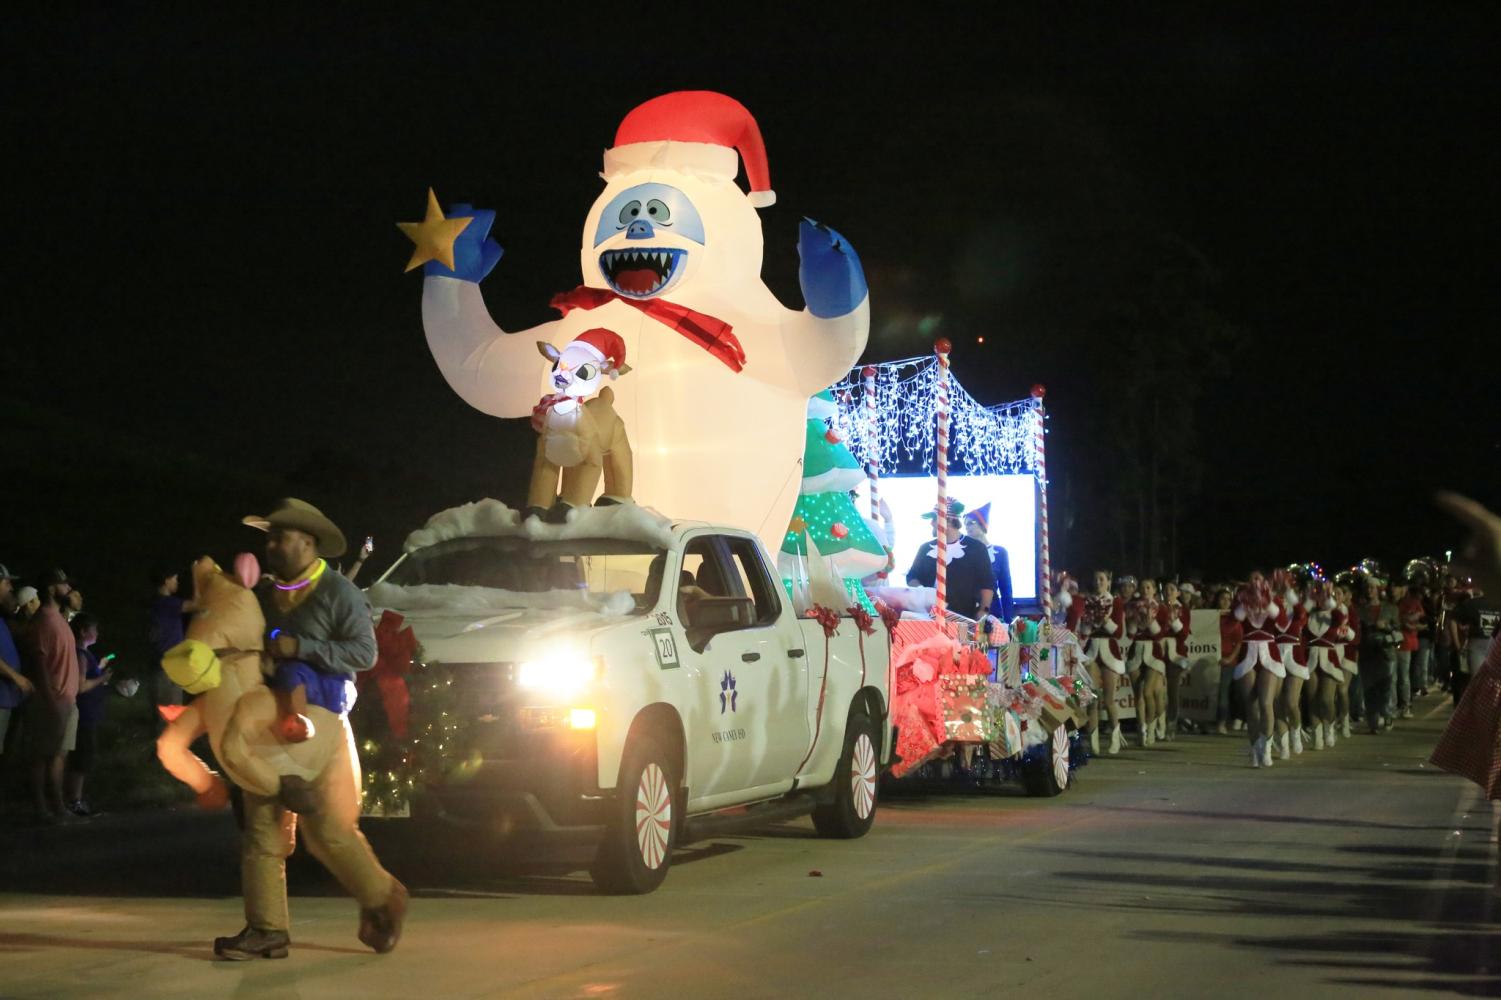 New+Caney+ISD+holds+first+Christmas+Parade+December+6